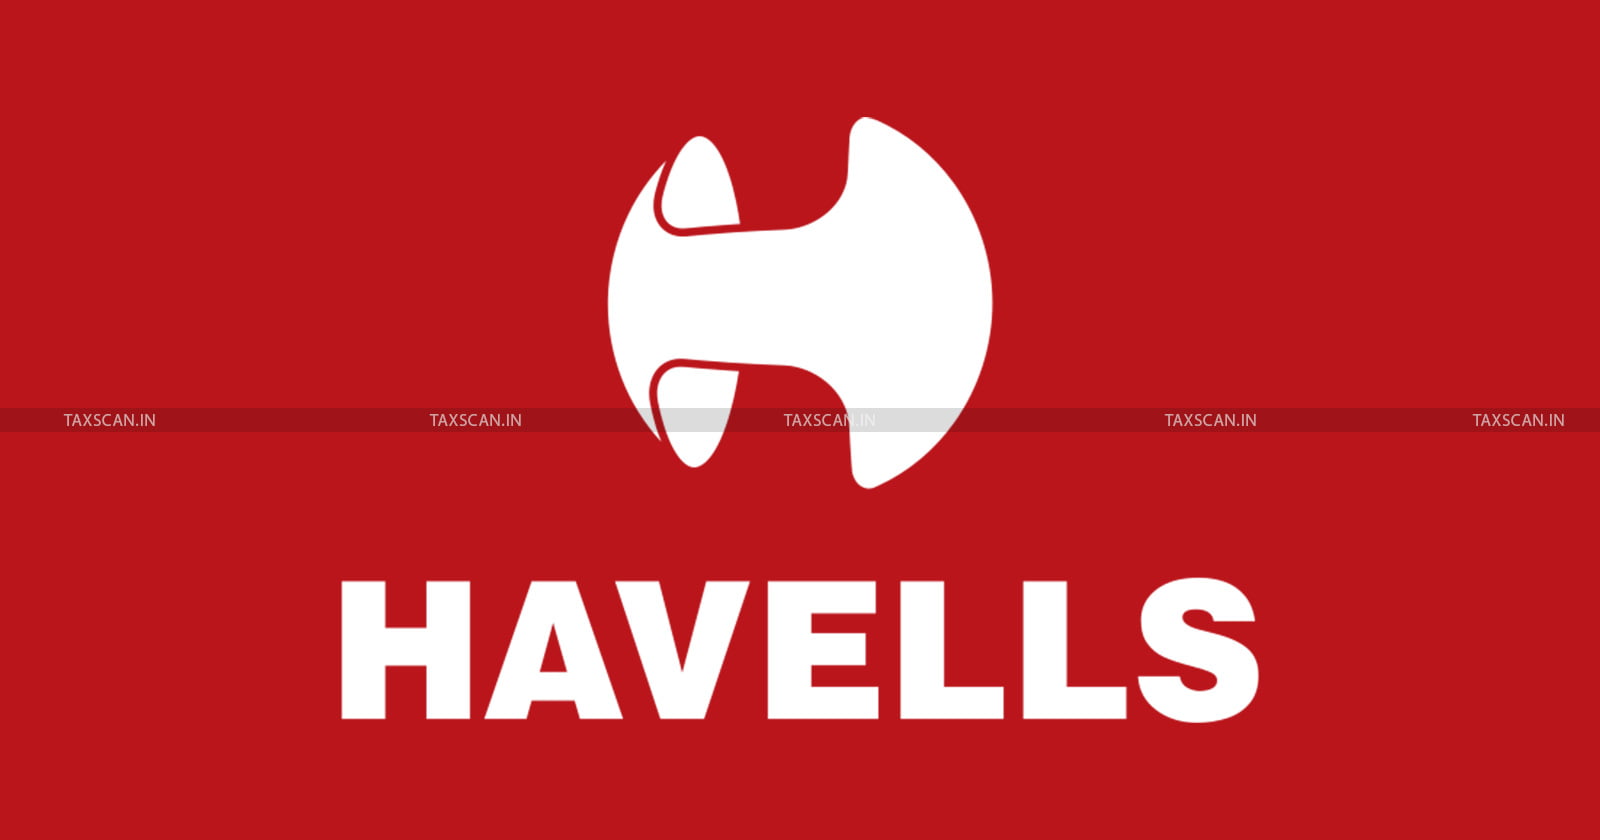 Penalty - Income - Tax - Payable - Book - Profit - ITAT - Havells - India - TAXSCAN